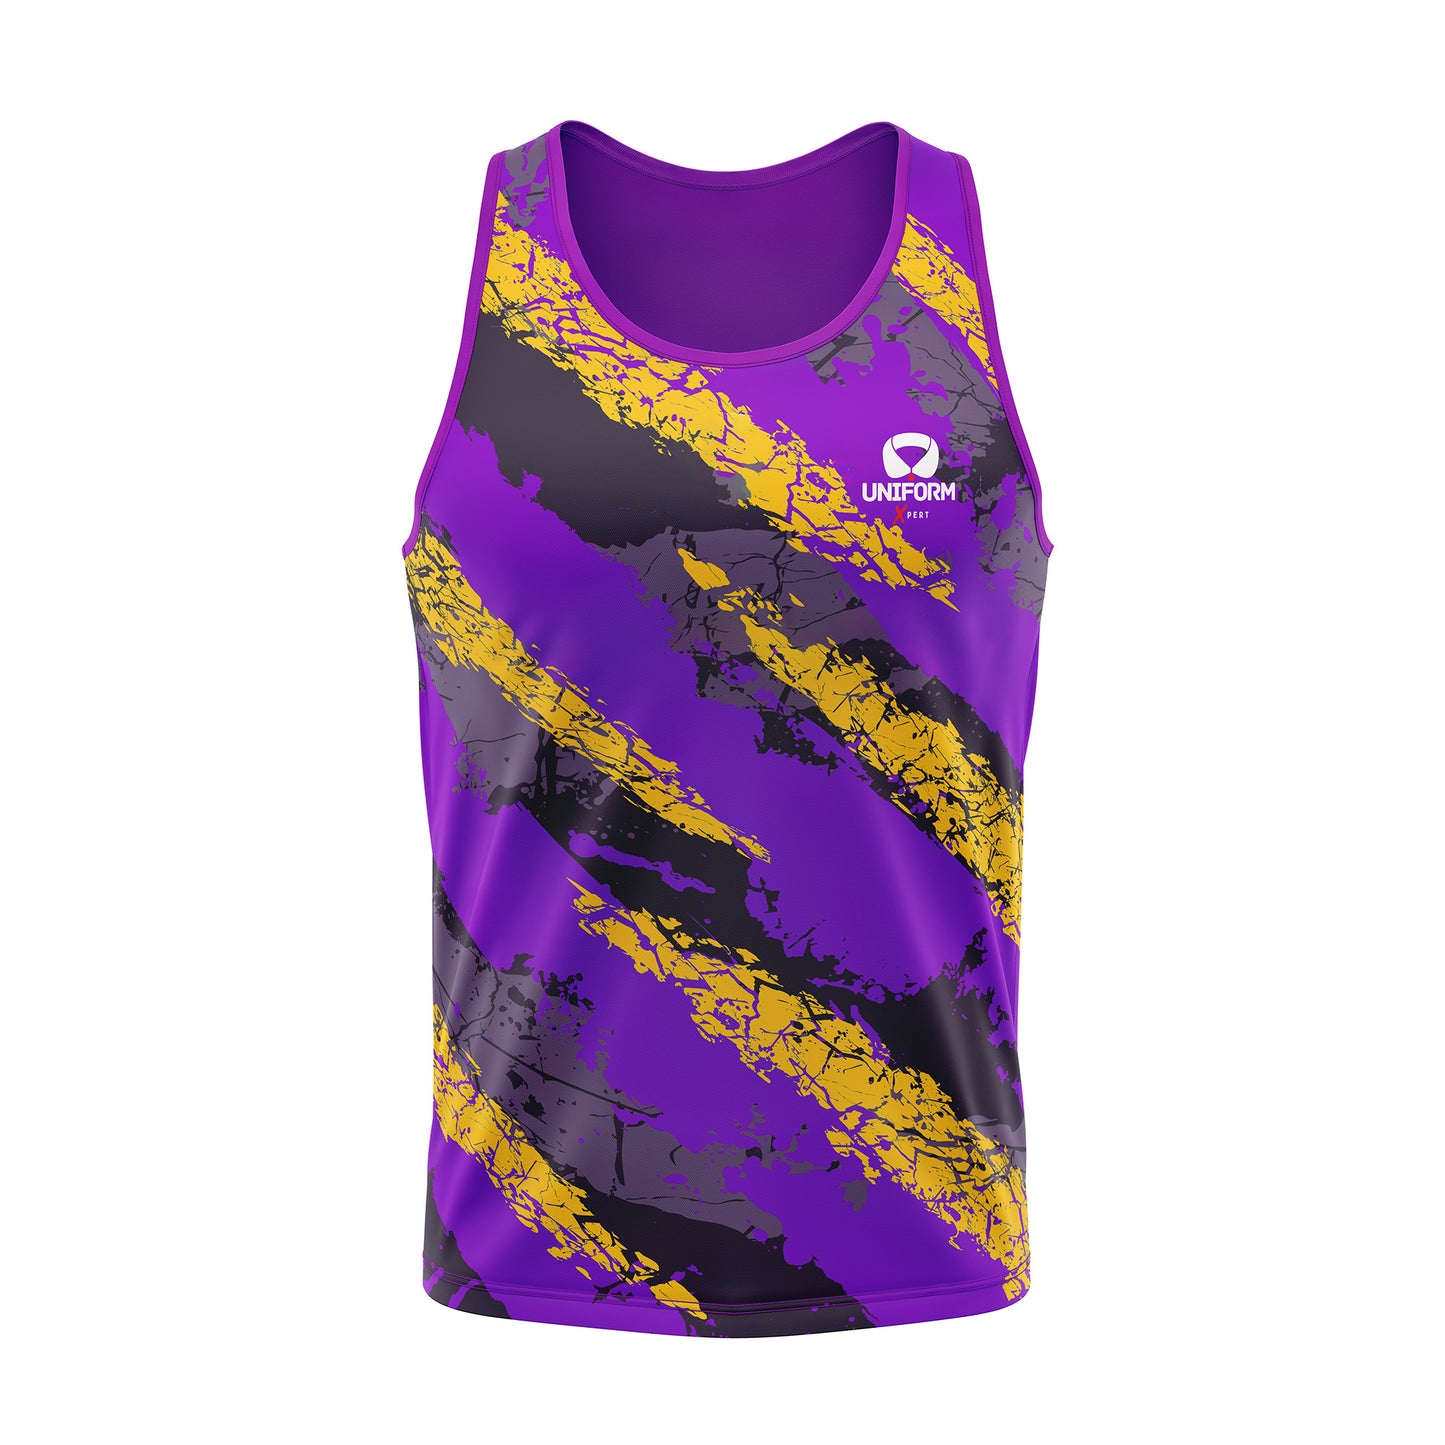 Custom Tank Tops | Personalized Performance Sportswear for Athletes